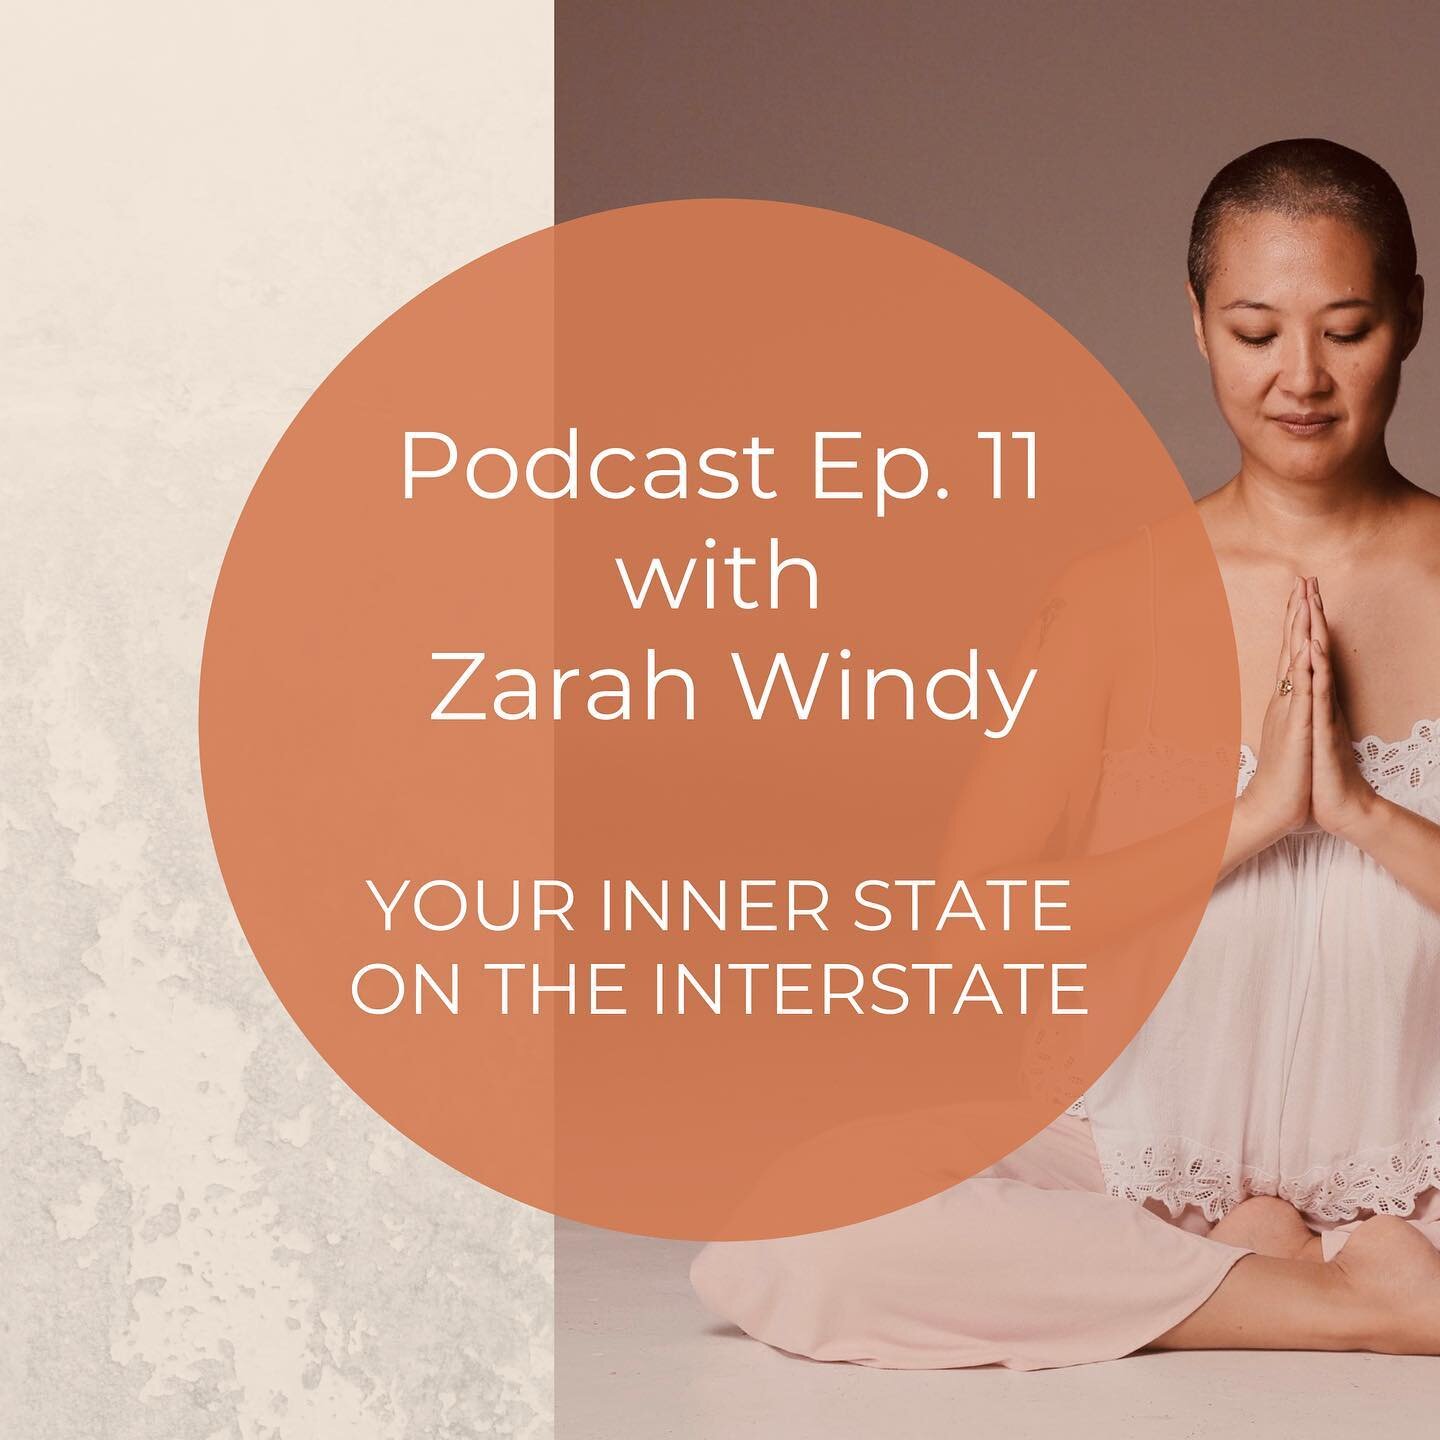 I can&rsquo;t express the joy of connecting with @zarahwindy in the Philippines last year and getting to join again for this podcast episode. So grateful she could join for a beautiful conversation about her starting a healing center in Cebu, how fre